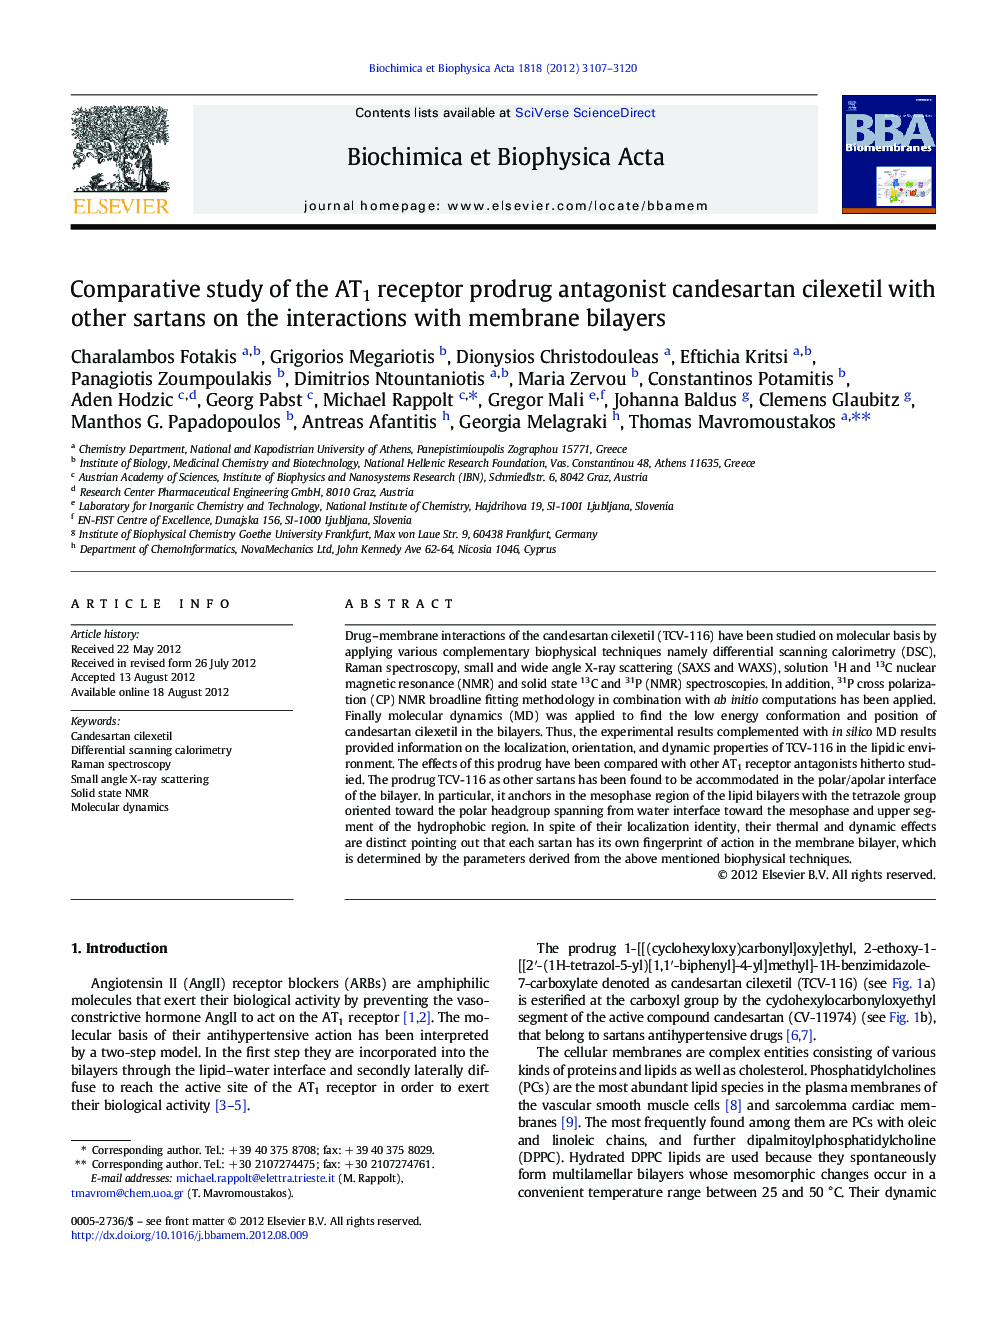 Comparative study of the AT1 receptor prodrug antagonist candesartan cilexetil with other sartans on the interactions with membrane bilayers